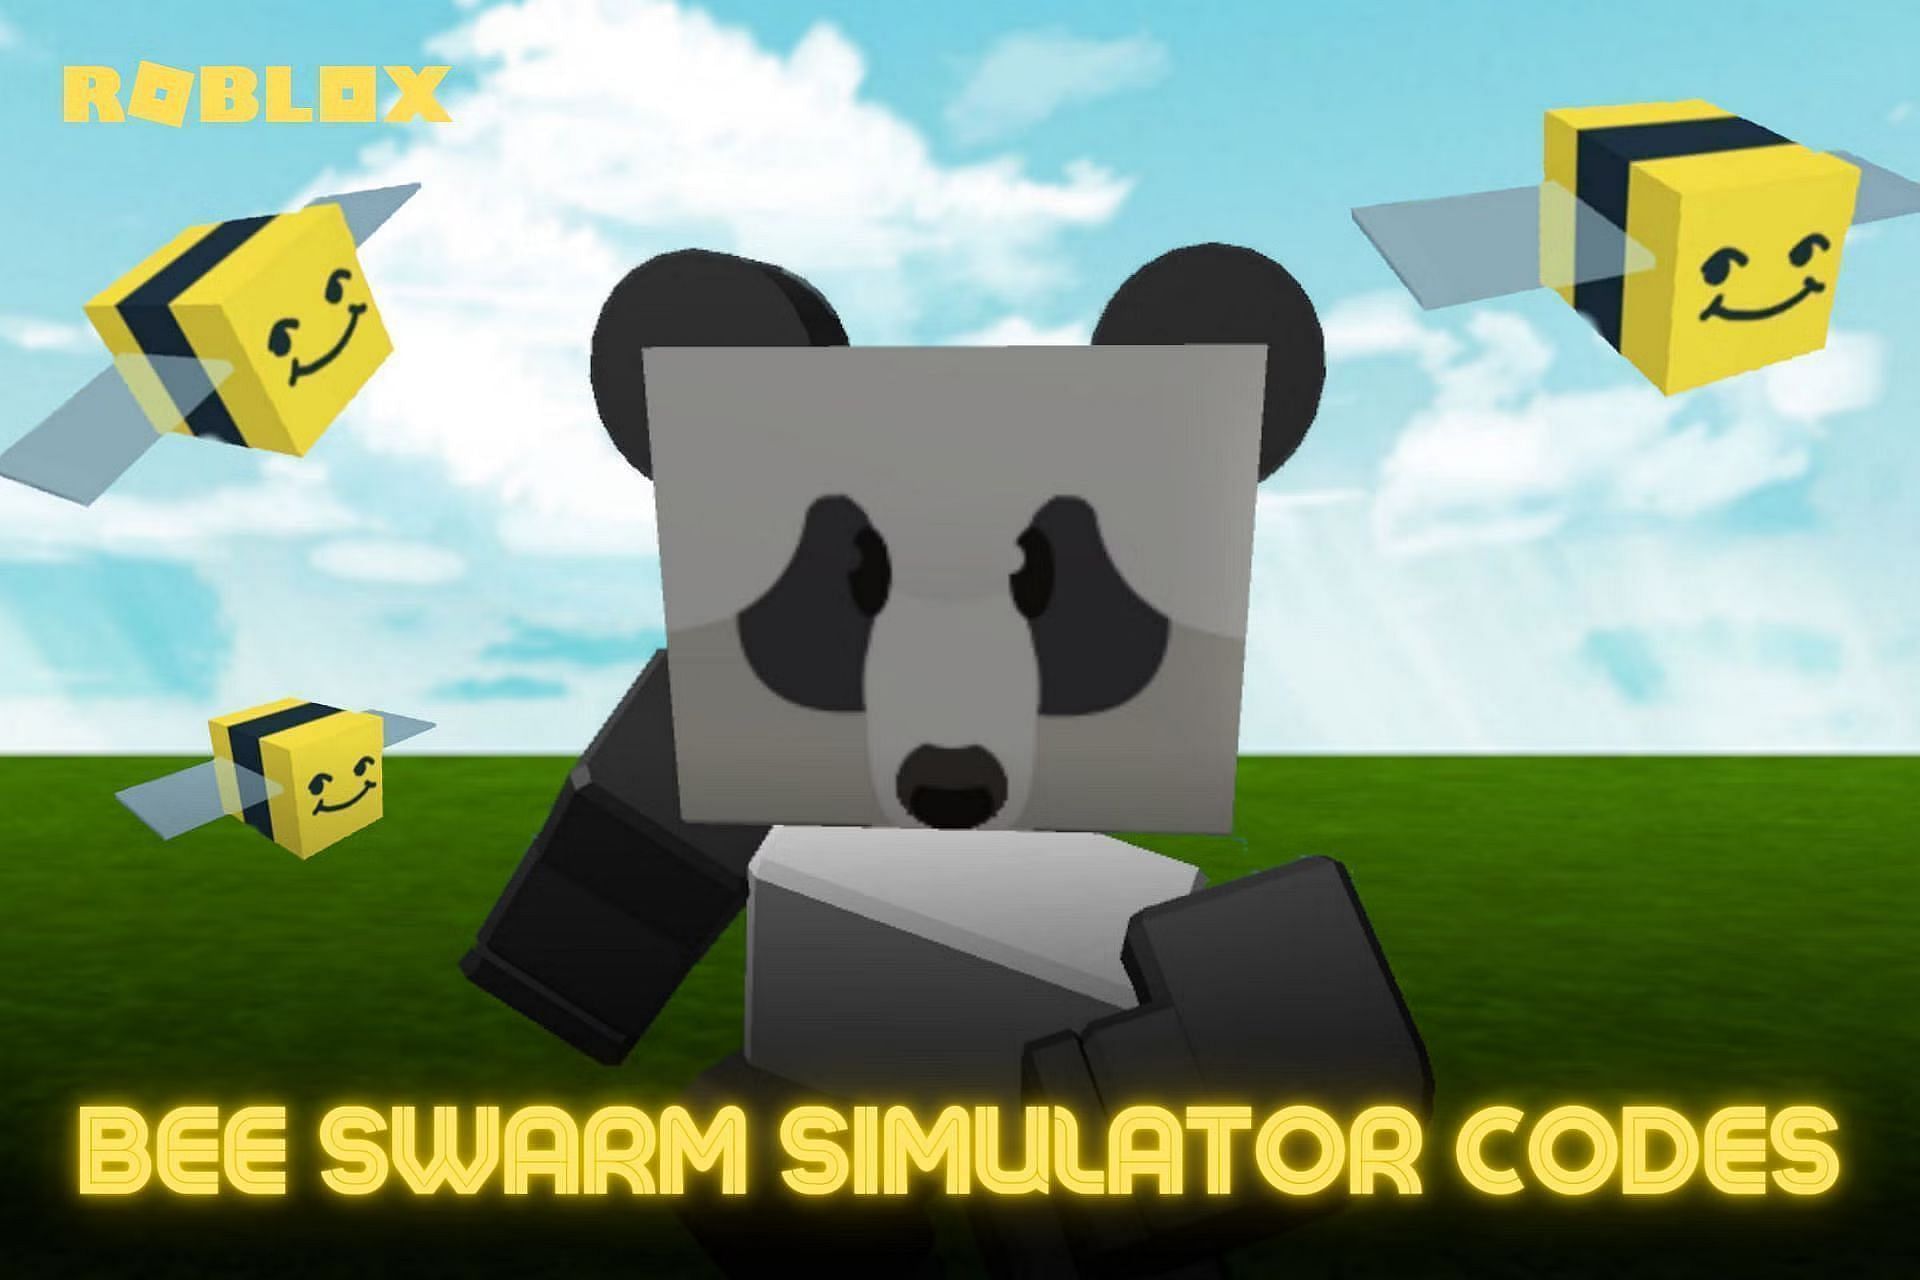 Featured cover of Bee Swarm Simulator codes. (Image via Roblox and Sportskeeda)